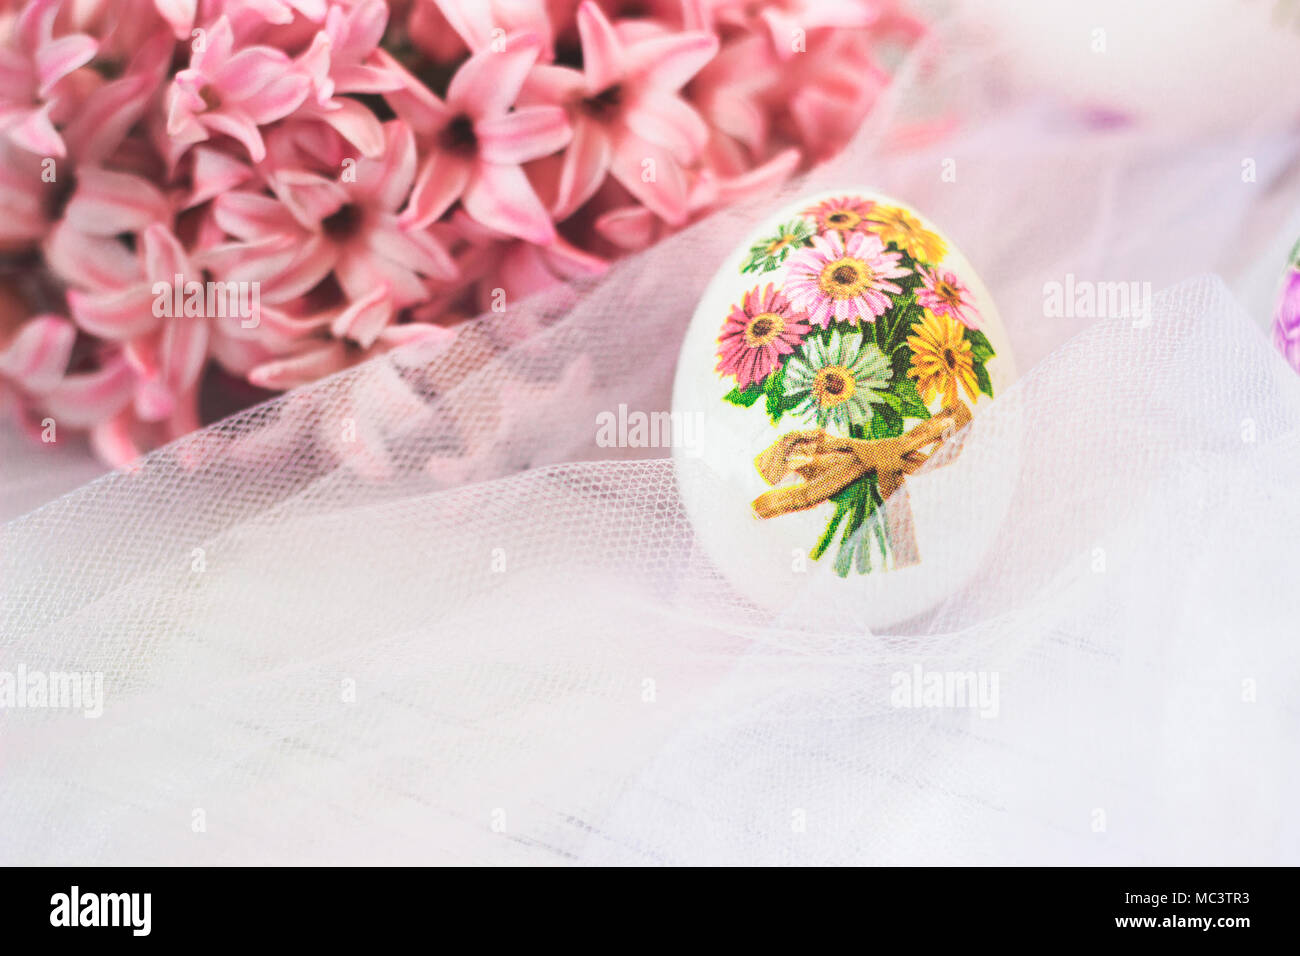 Decoupage decorated Easter egg, with pink hyacinths flowers, on white tulle background Stock Photo